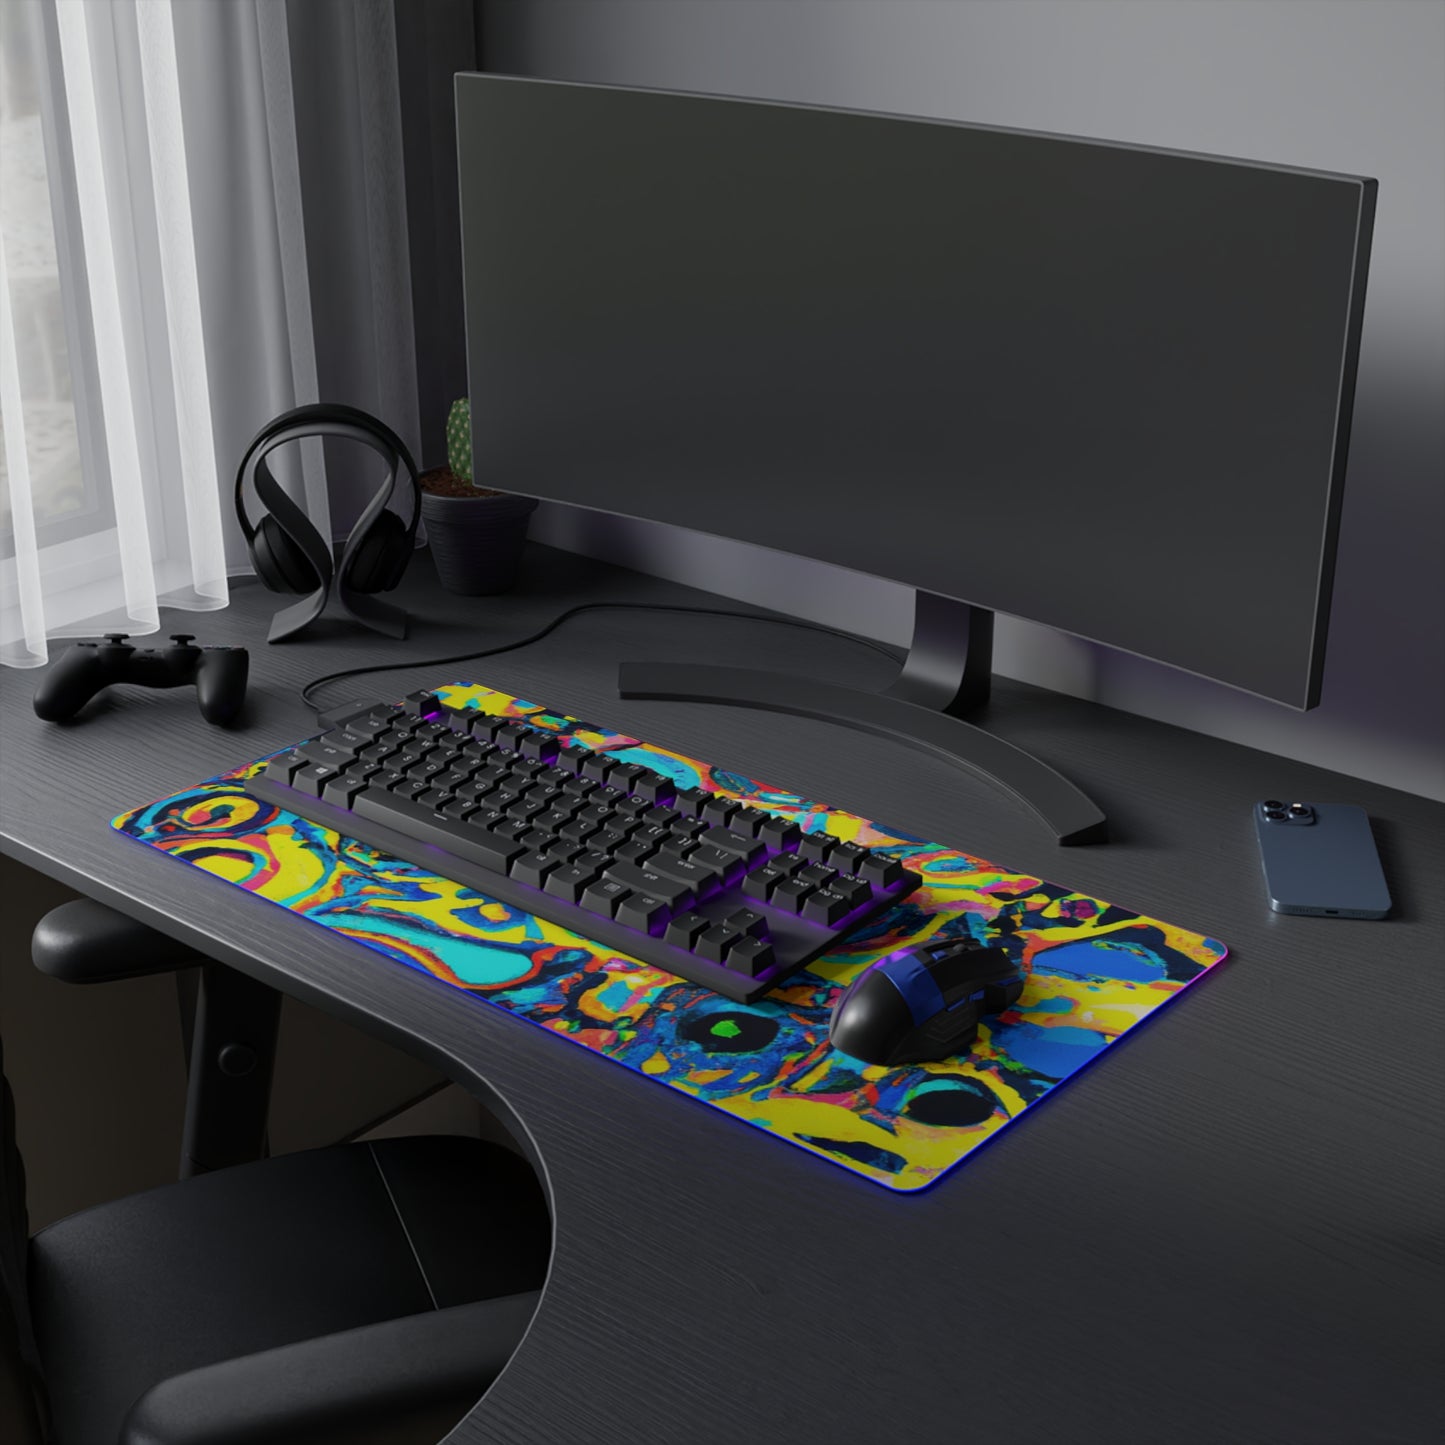 Sally Sailor - Psychedelic Trippy LED Light Up Gaming Mouse Pad